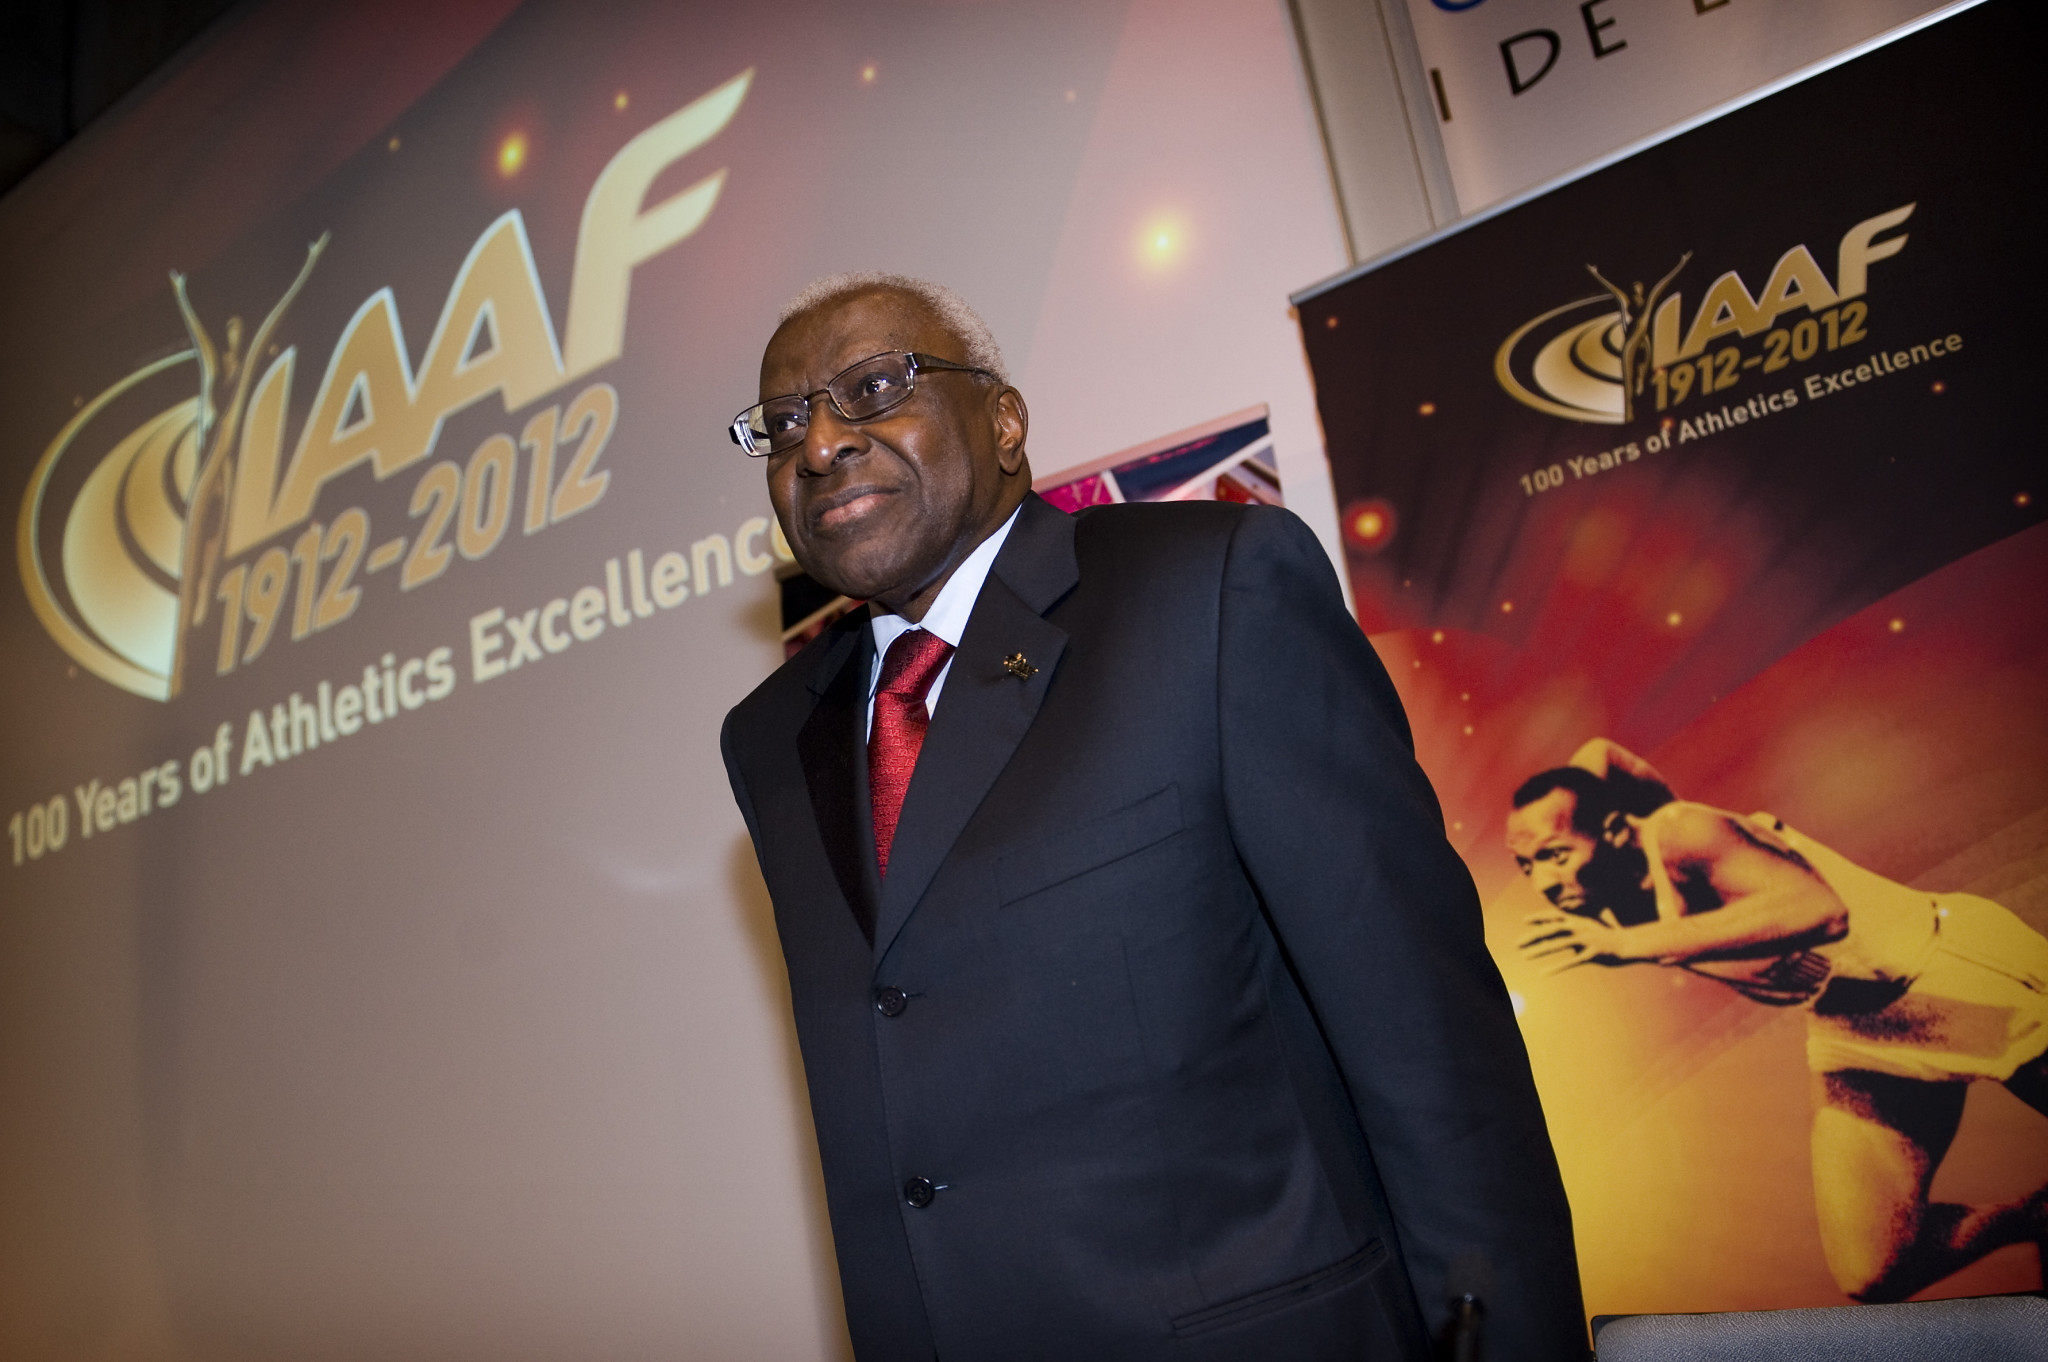 Lamine Diack led what is now World Athletics for 15 years ©Getty Images